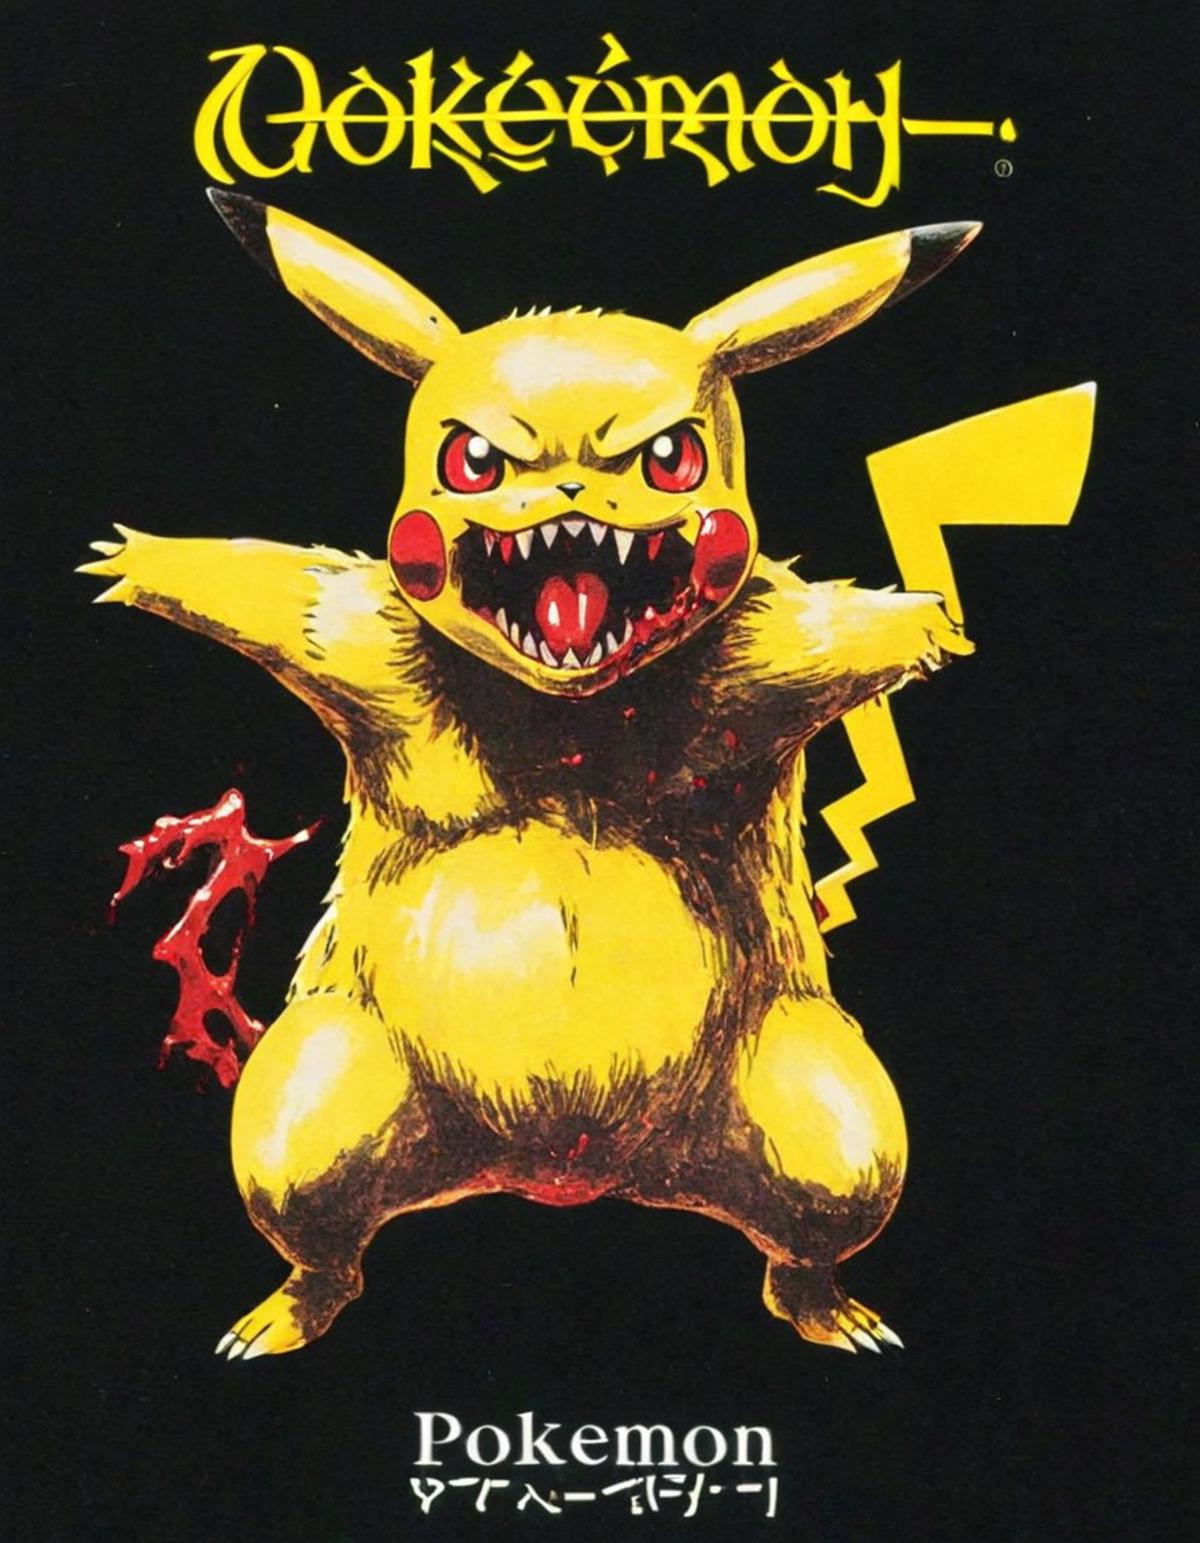 Angry looking Pokemon with blood dripping from its mouth.